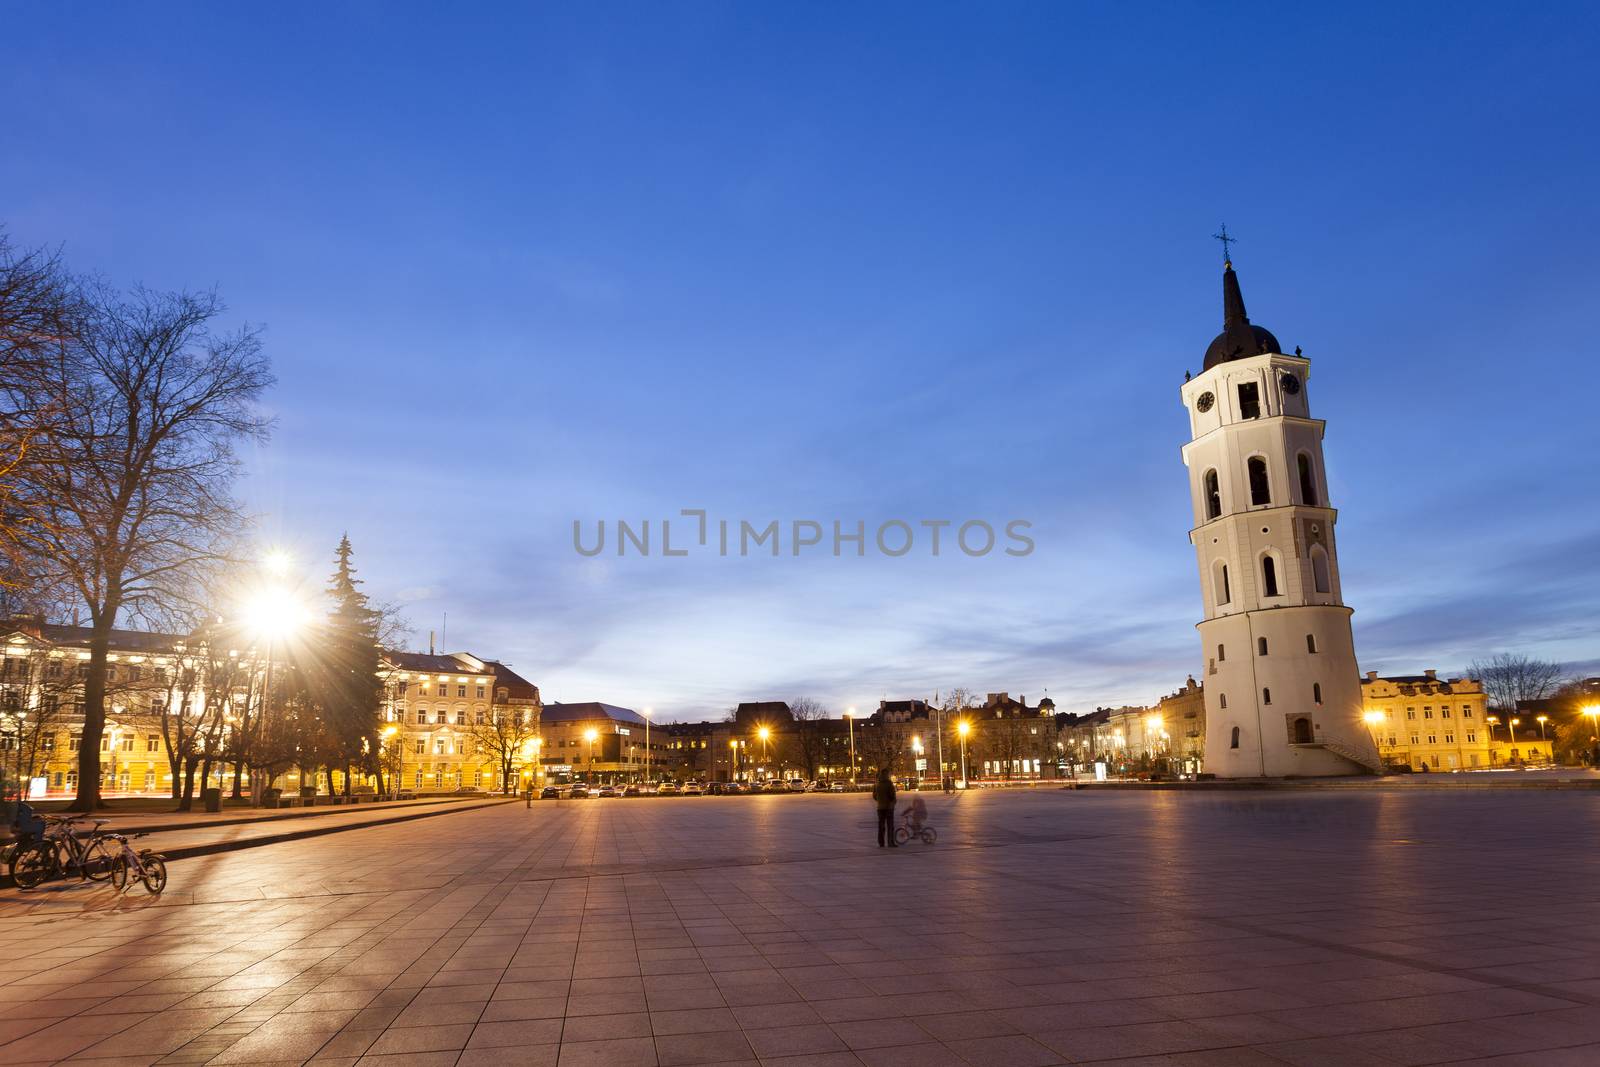 The Cathedral Square in central Vilnius during twilight time, Lithuania, Europe